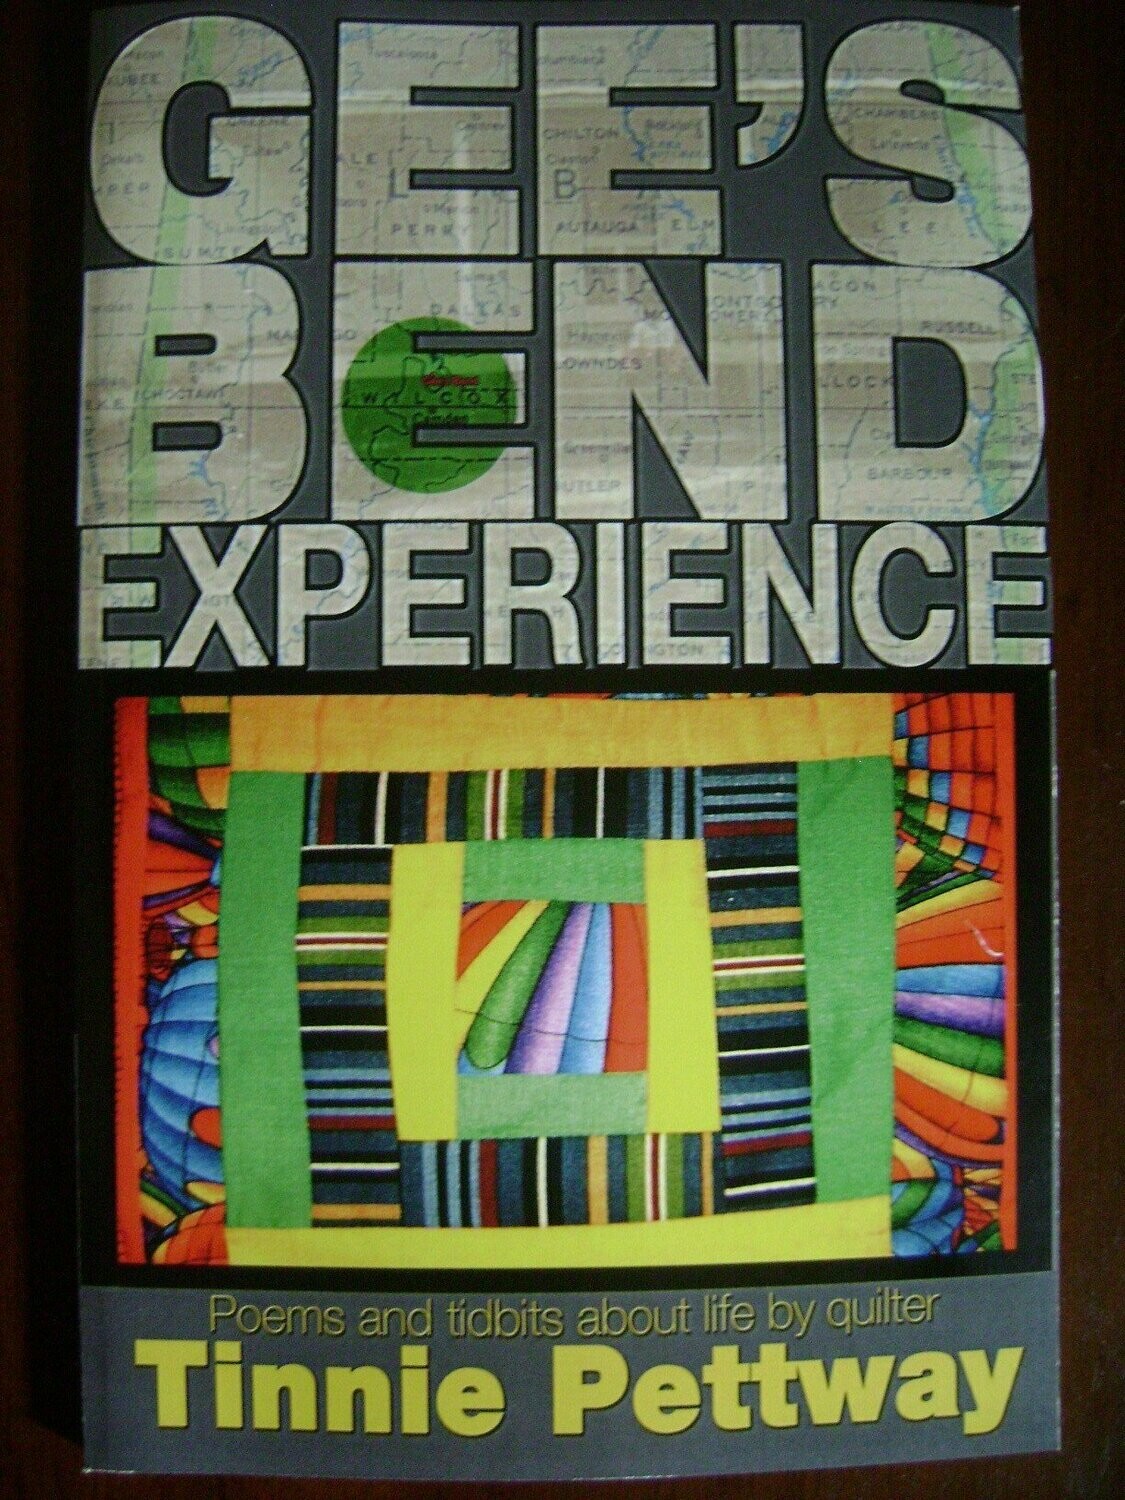 Gee's Bend Experience Poems and tidbits about life by quilter Tinnie Pettway